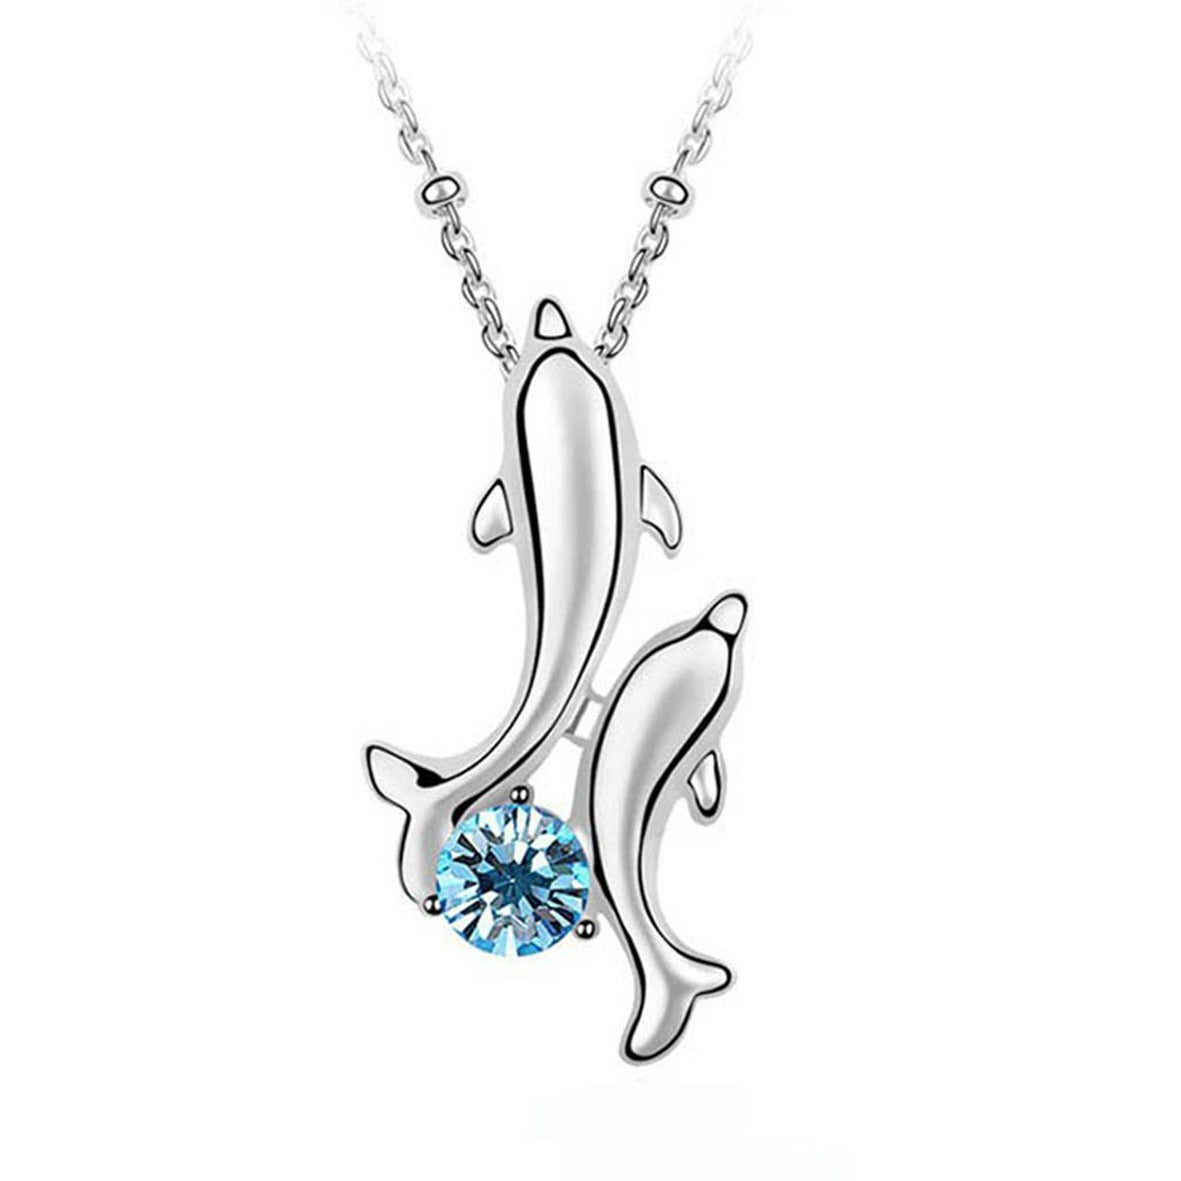 925 Silver Dolphin Pendant with Turquoise Cubic Zirconia on a 40cm chain (included).